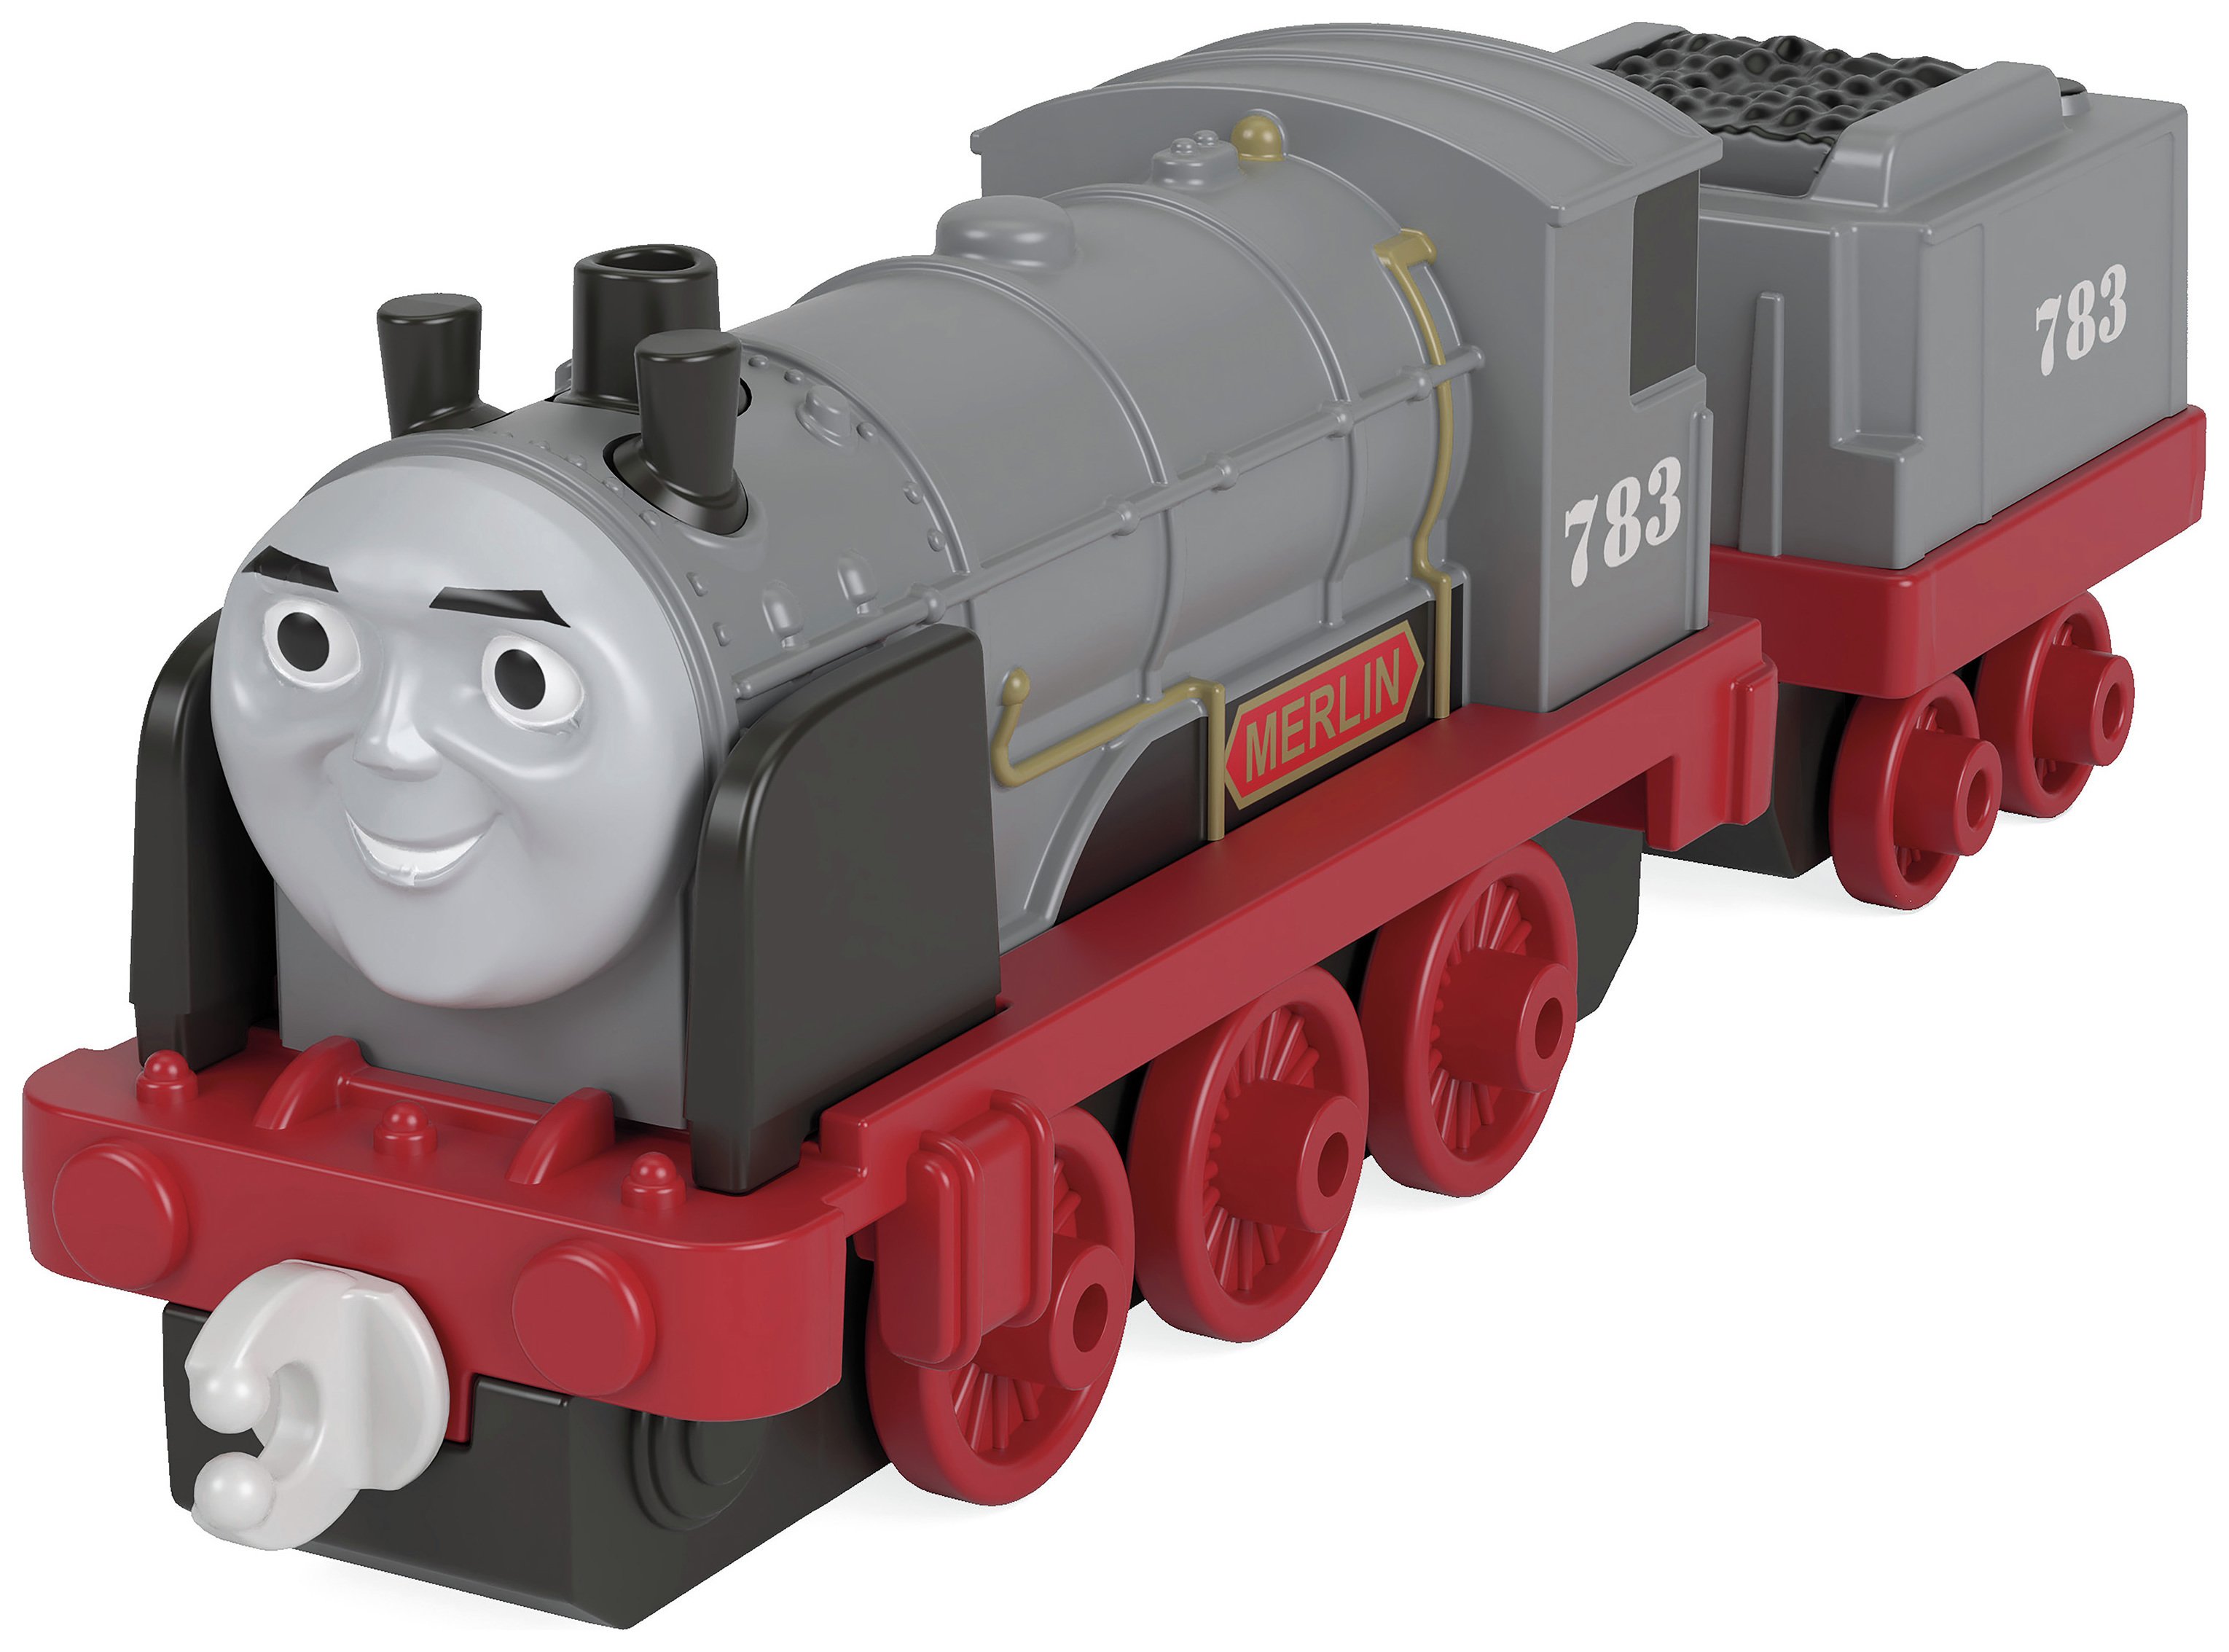 Thomas & Friends Adventures Merlin the Invisible Engine Reviews